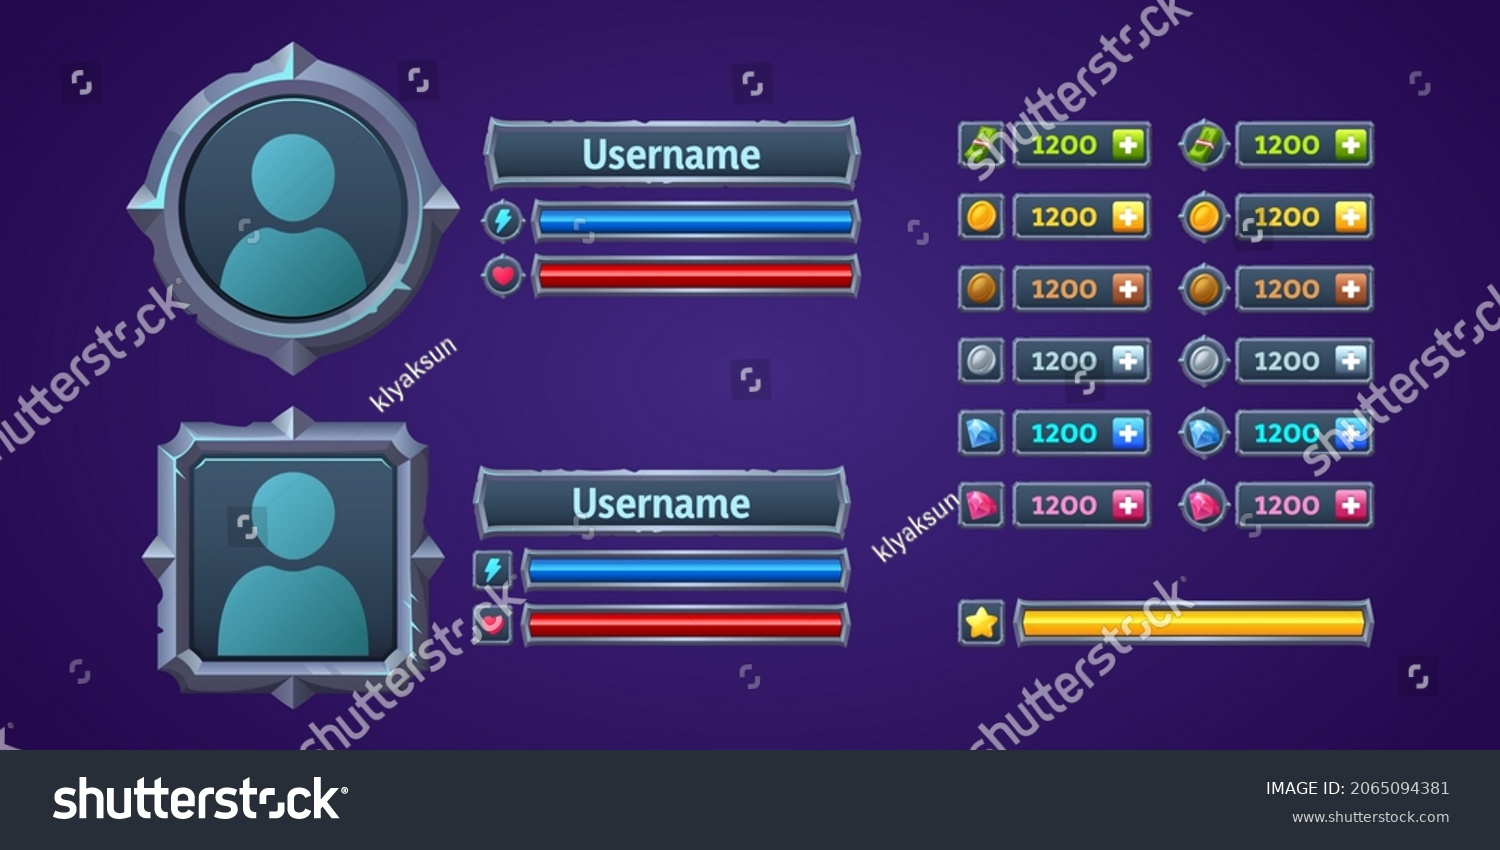 SVG of Game ui profile, user menu interface 2d graphic design with frame for avatar, username plaques, life or power scales, and assets score. Rpg for pc or mobile screen, Cartoon vector illustration svg